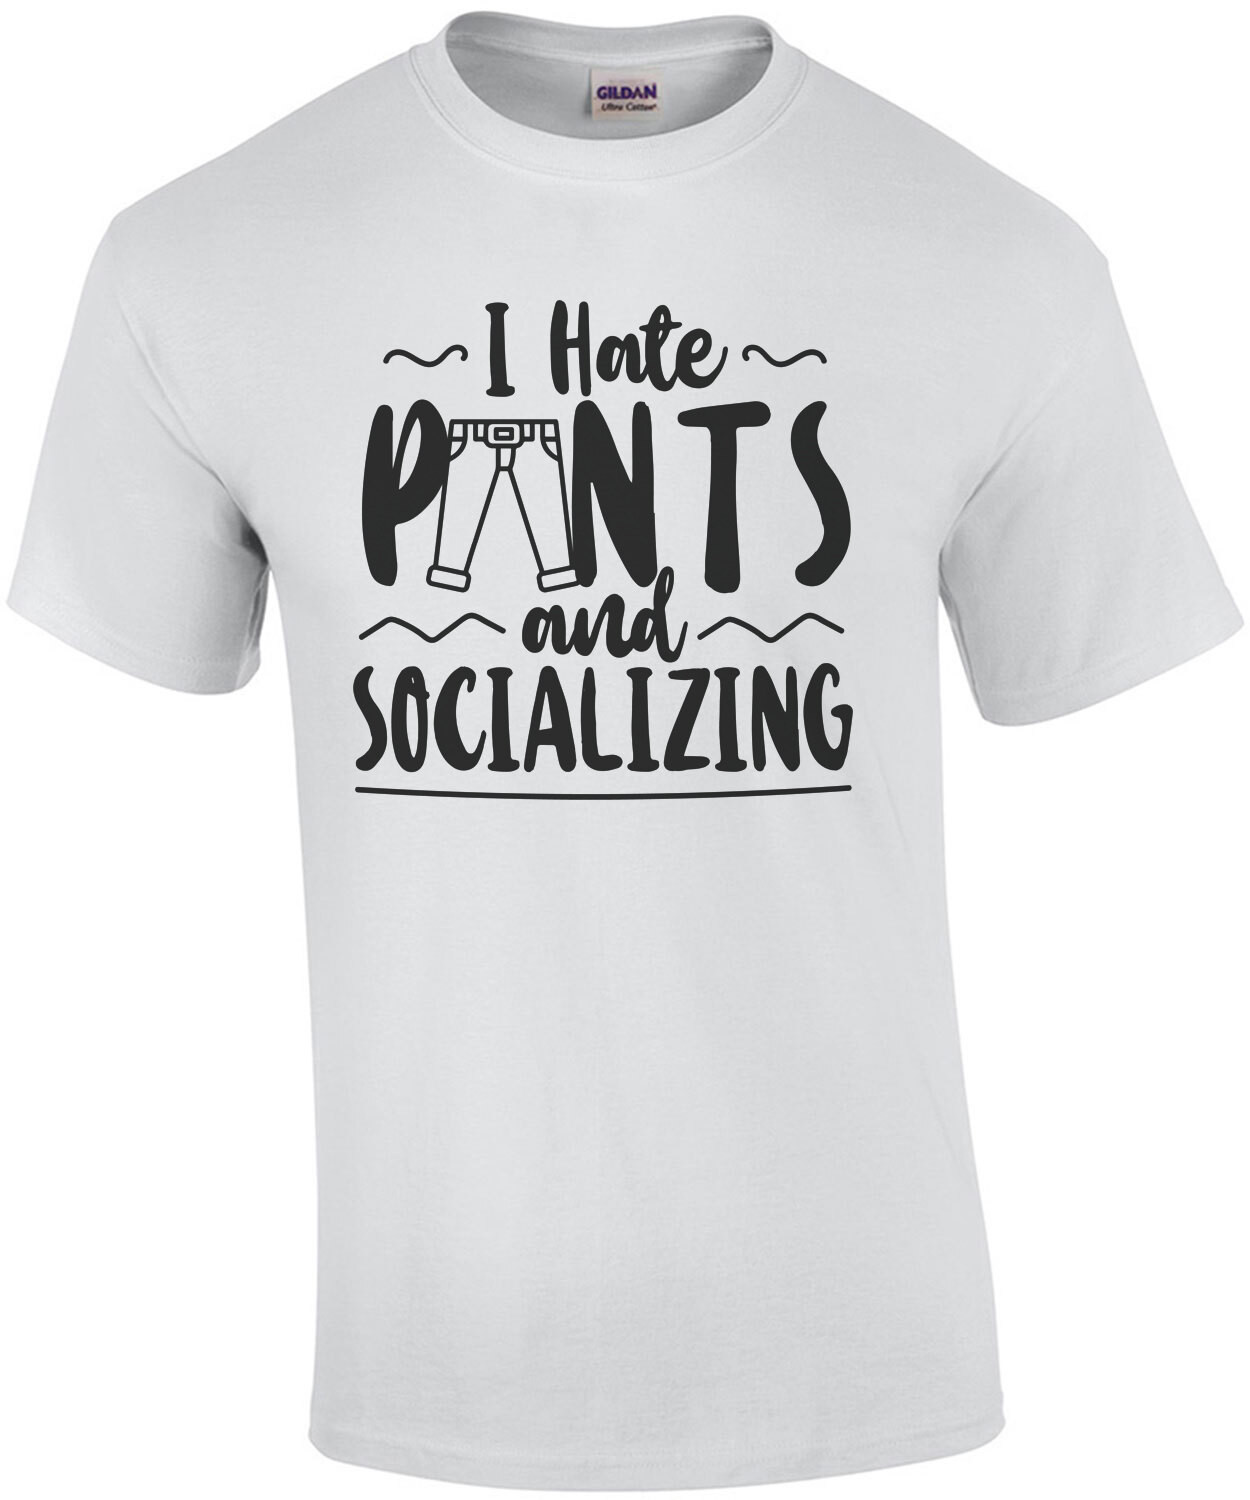 I hate pants and socializing - funny t-shirt